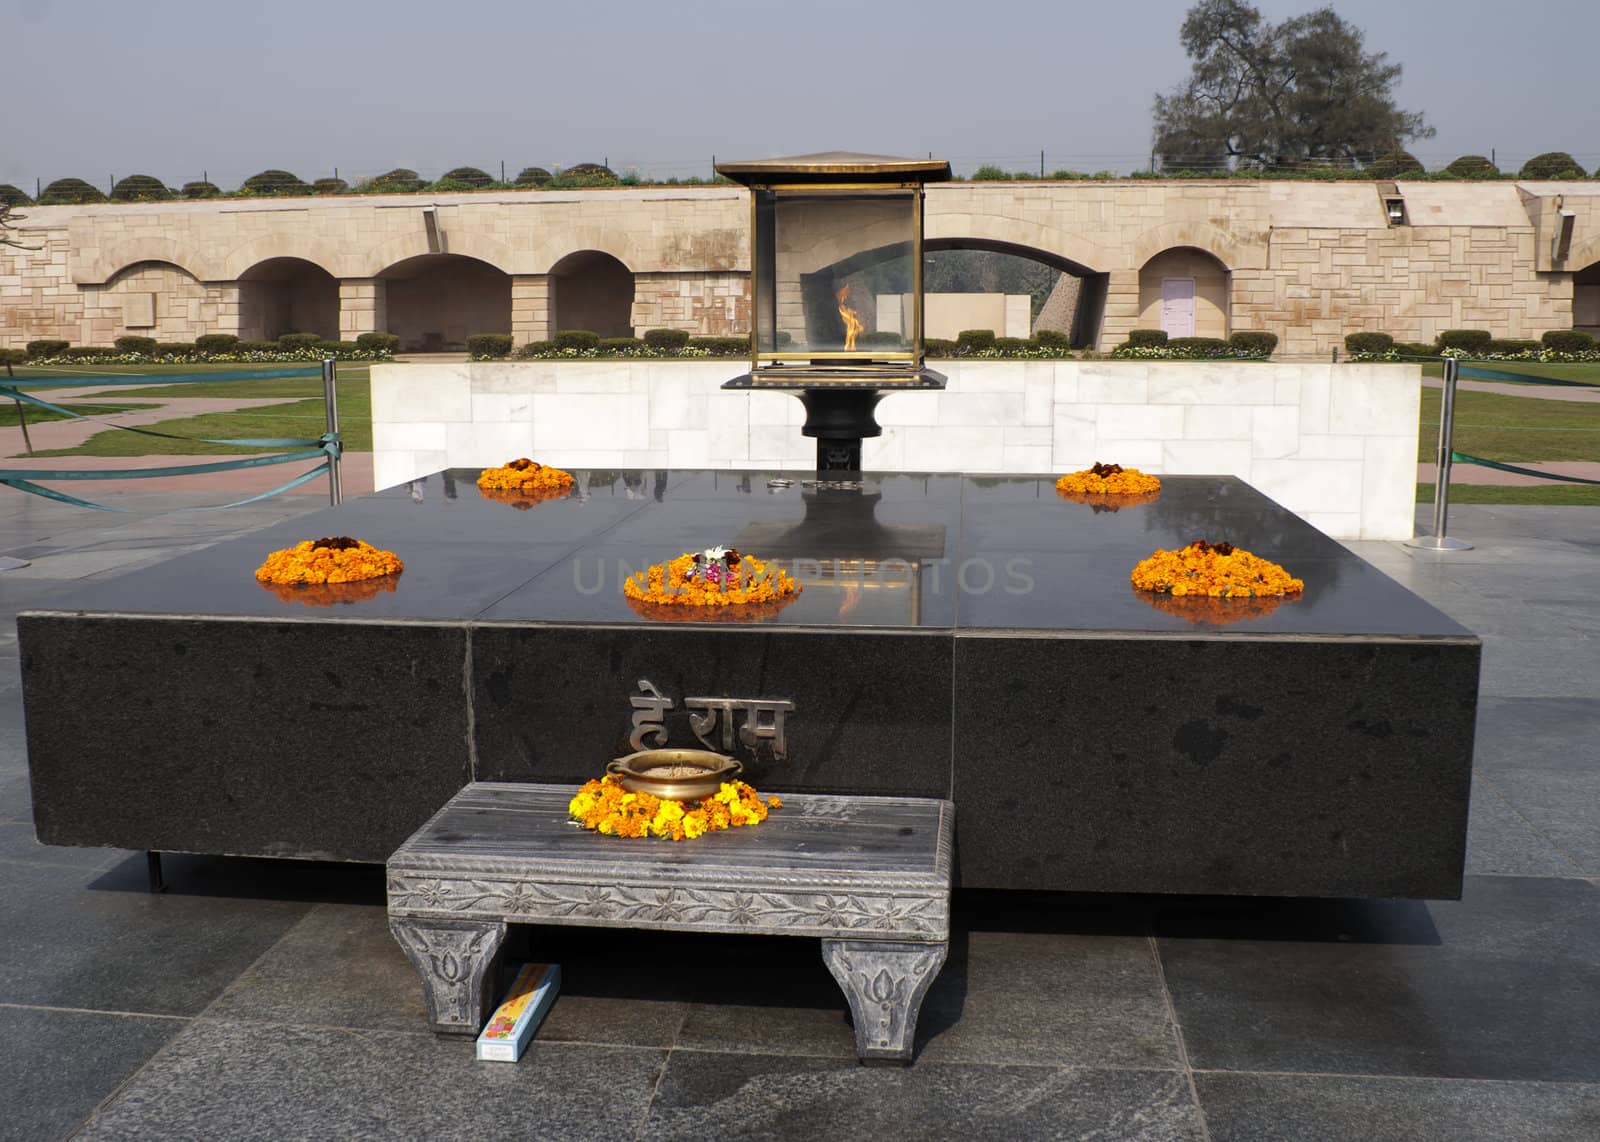 Altar like platform with eternal flame on the spot where Gandhi was cremated. by Claudine